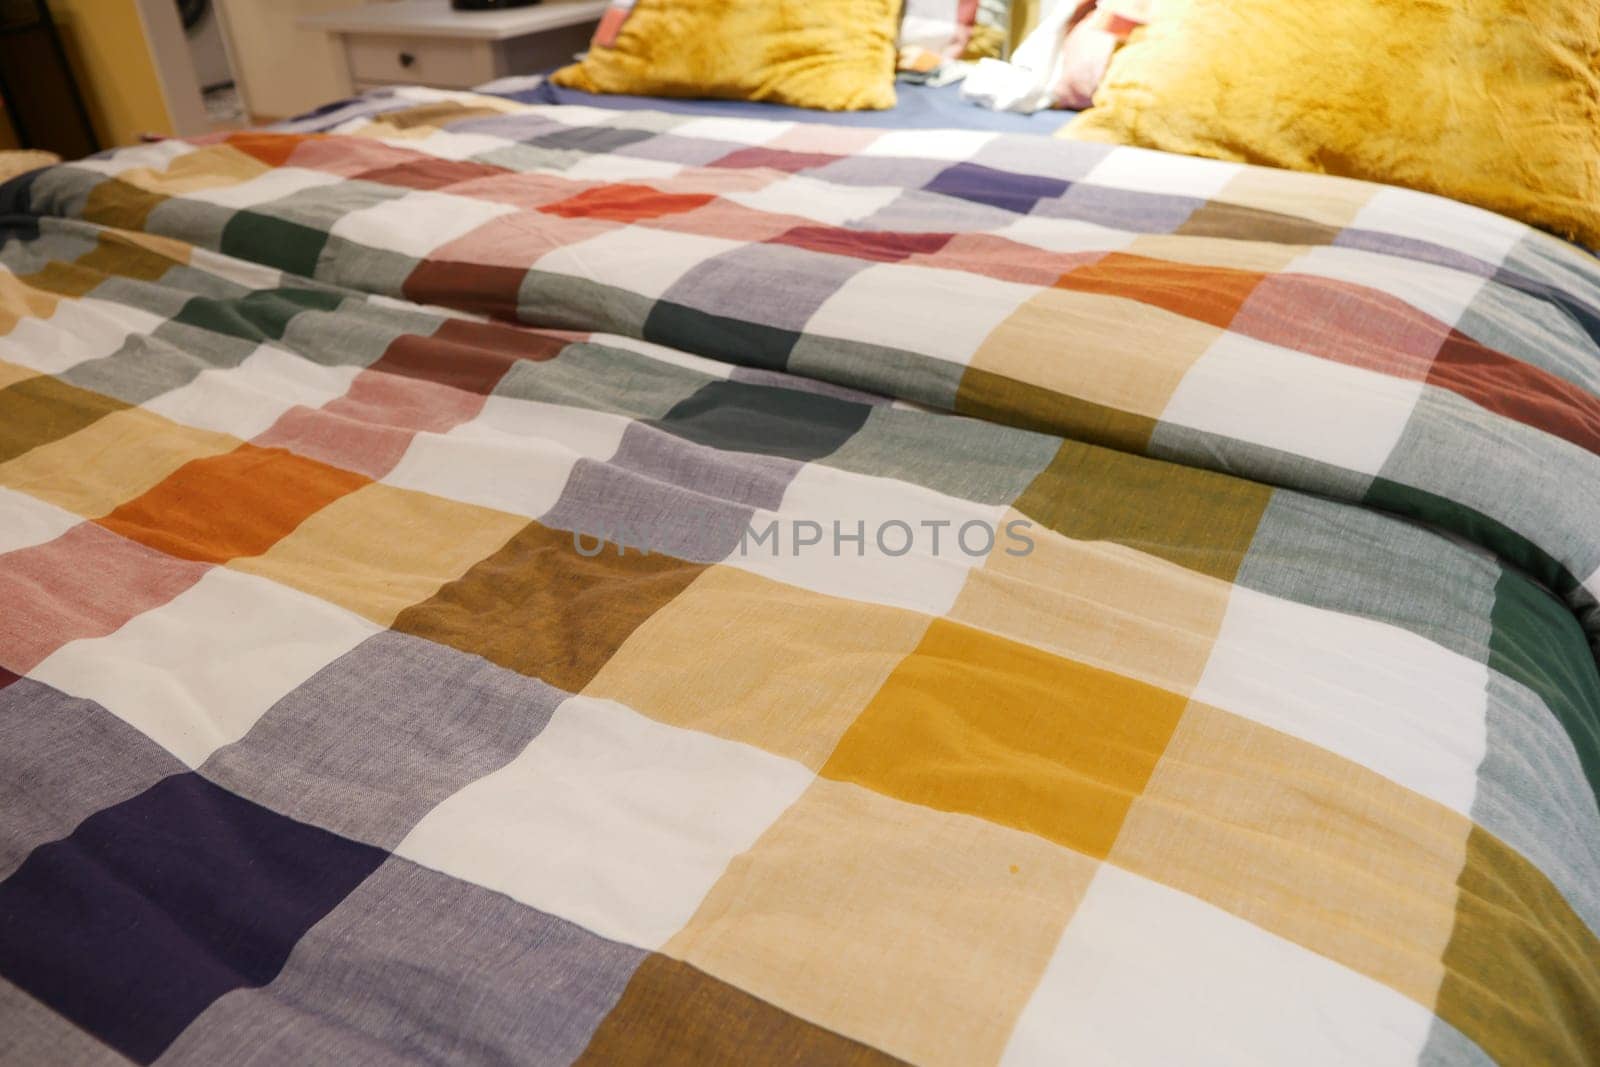 a bed with a colorful plaid comforter and pillows in shades of Purple, Orange, and Yellow, by towfiq007